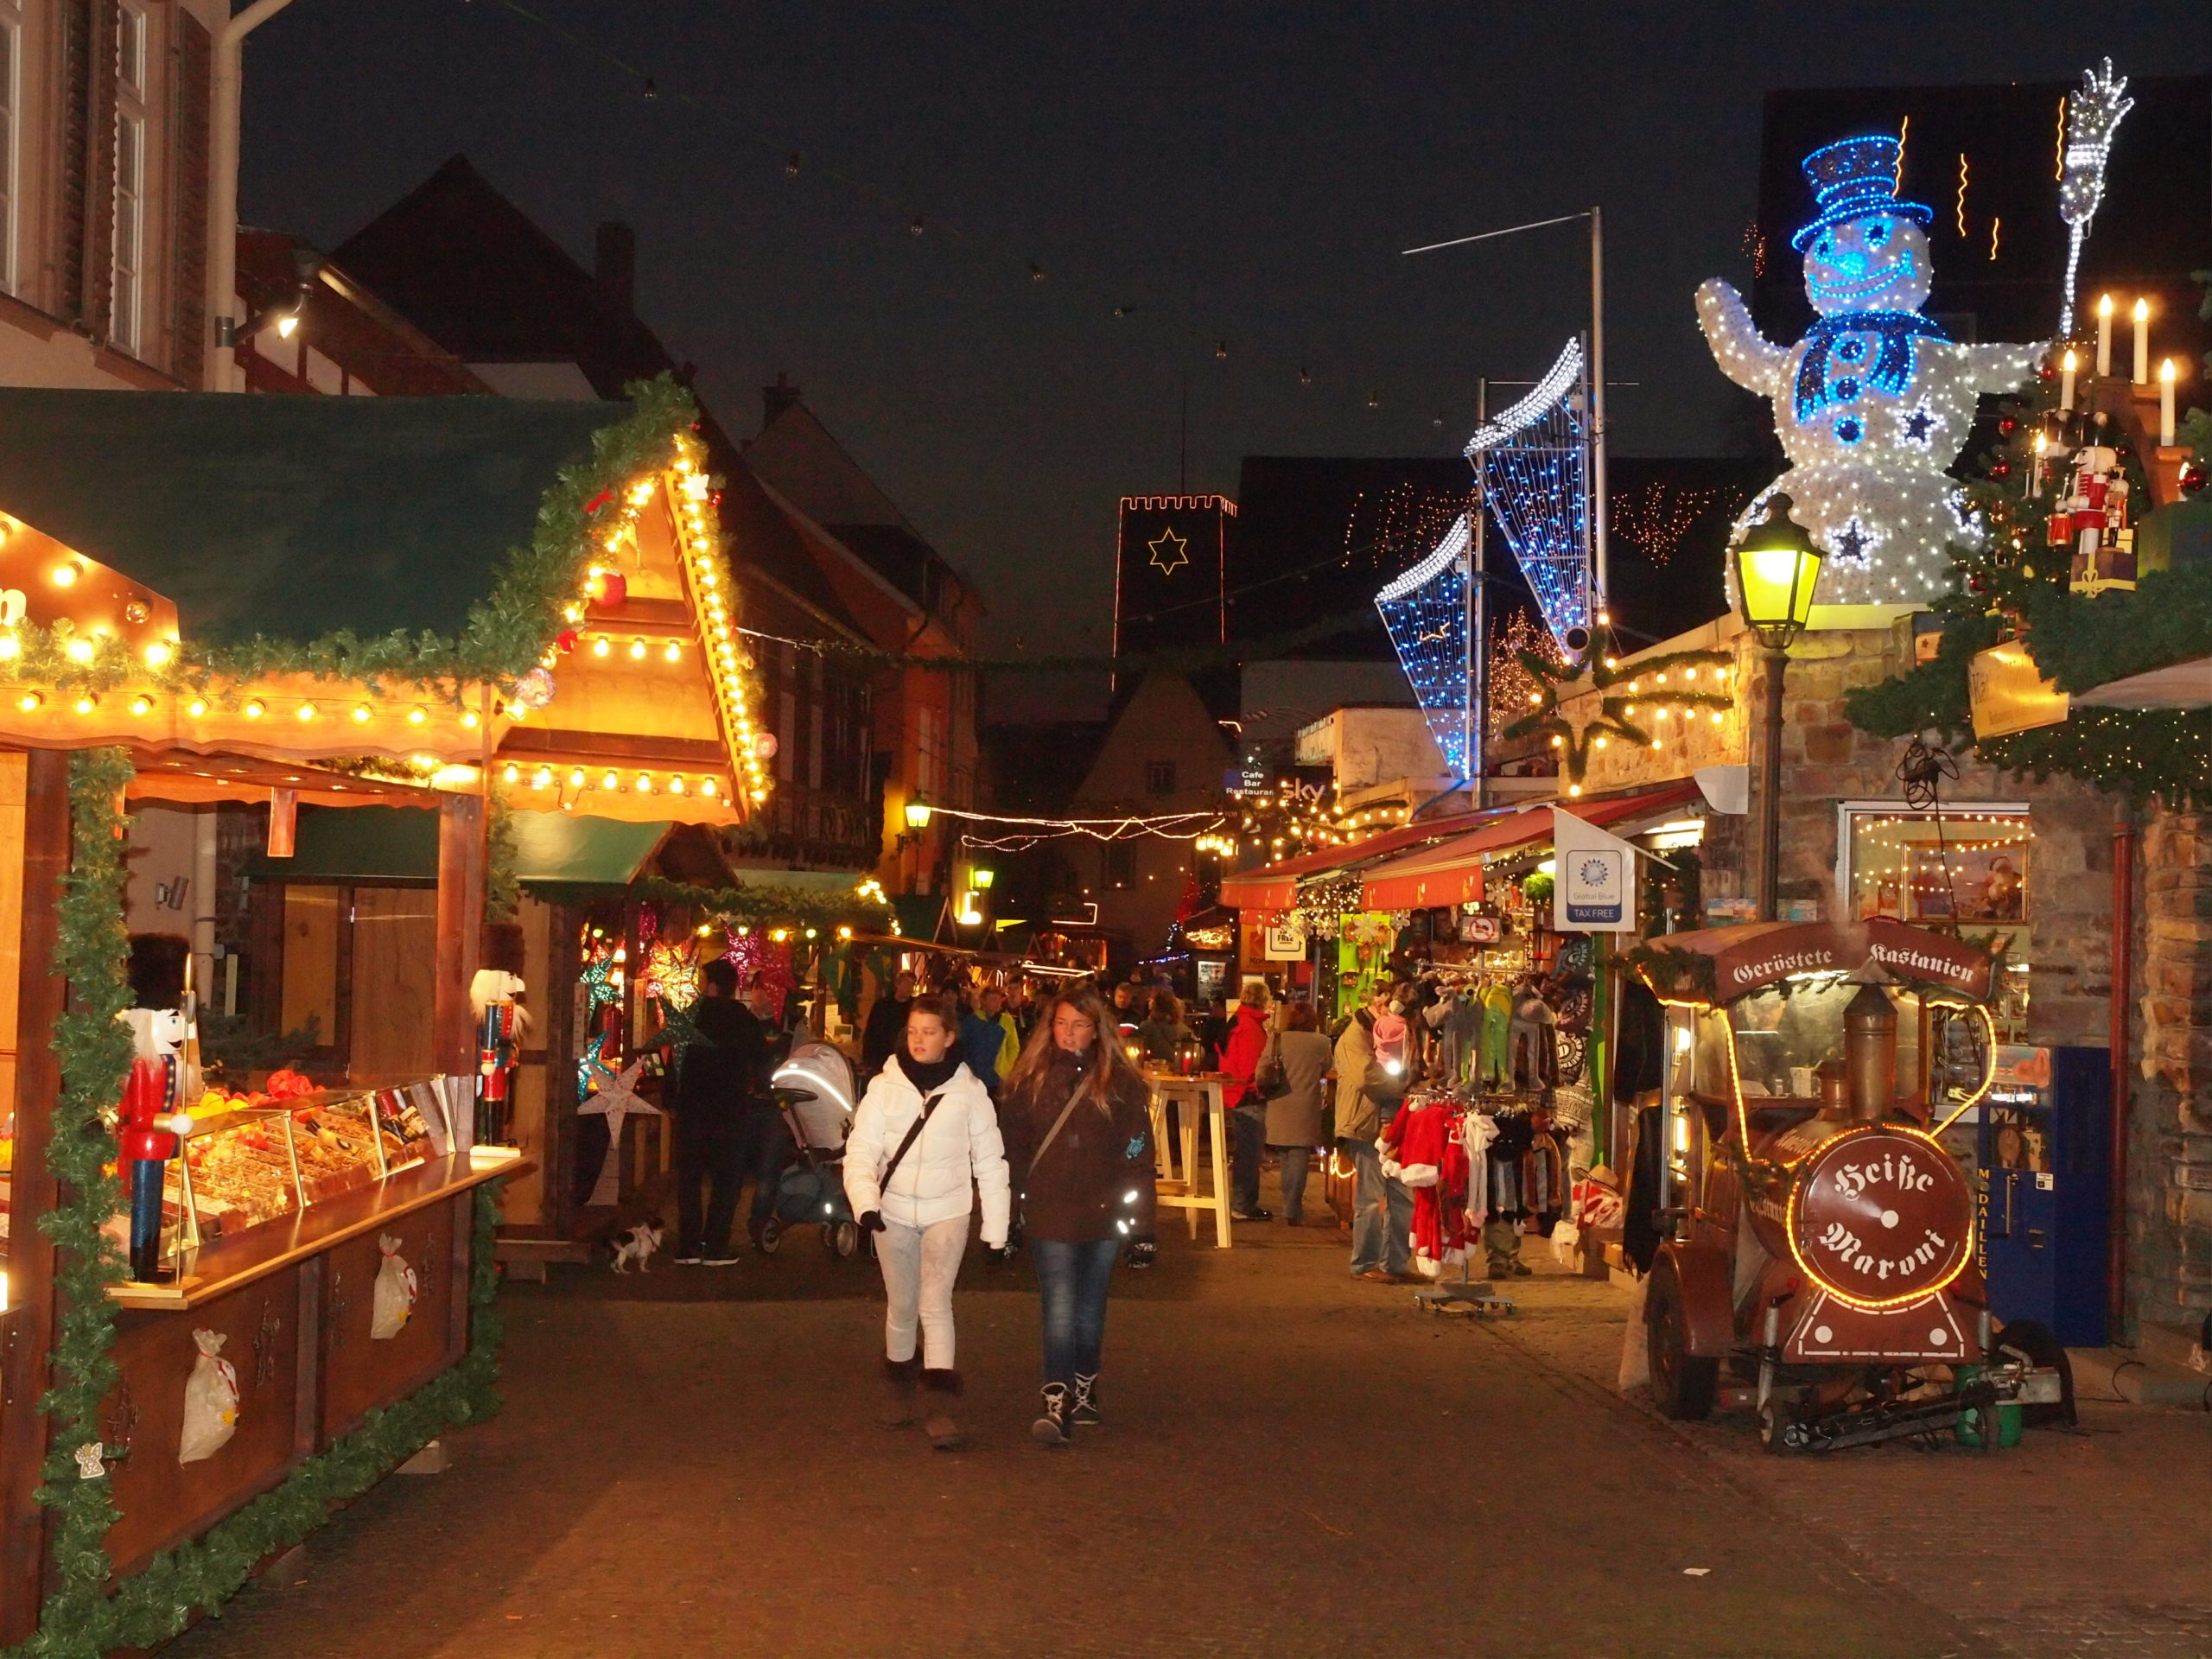 Best Christmas Markets In Germany - Where is the market?